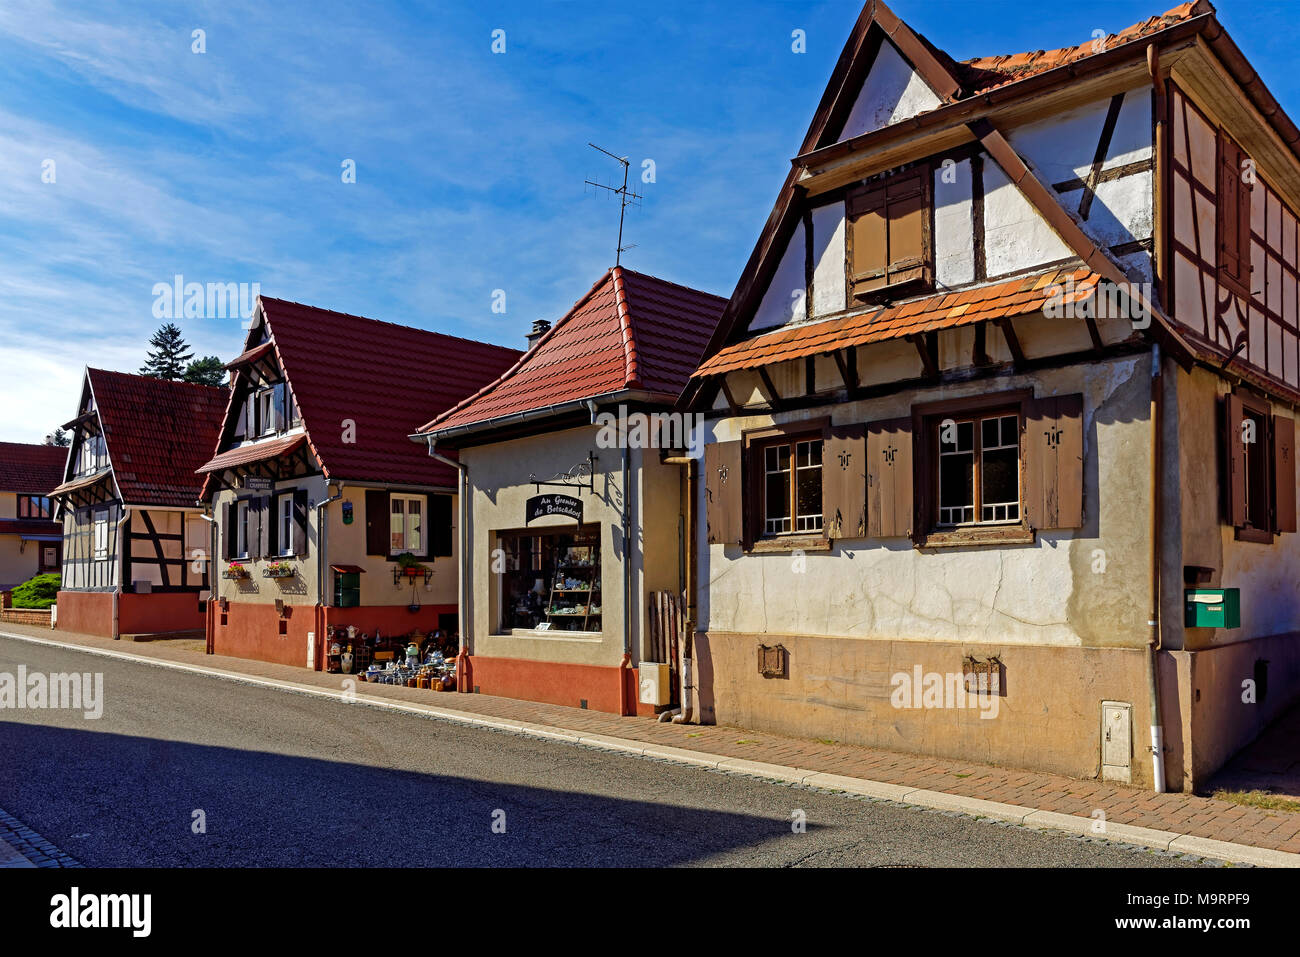 Europe, France, the Rhine, Bas (Alsace), village Betsch, Rue of the Potiers, street view, Poterie, pottery, exhibition, architecture, flowers, framewo Stock Photo